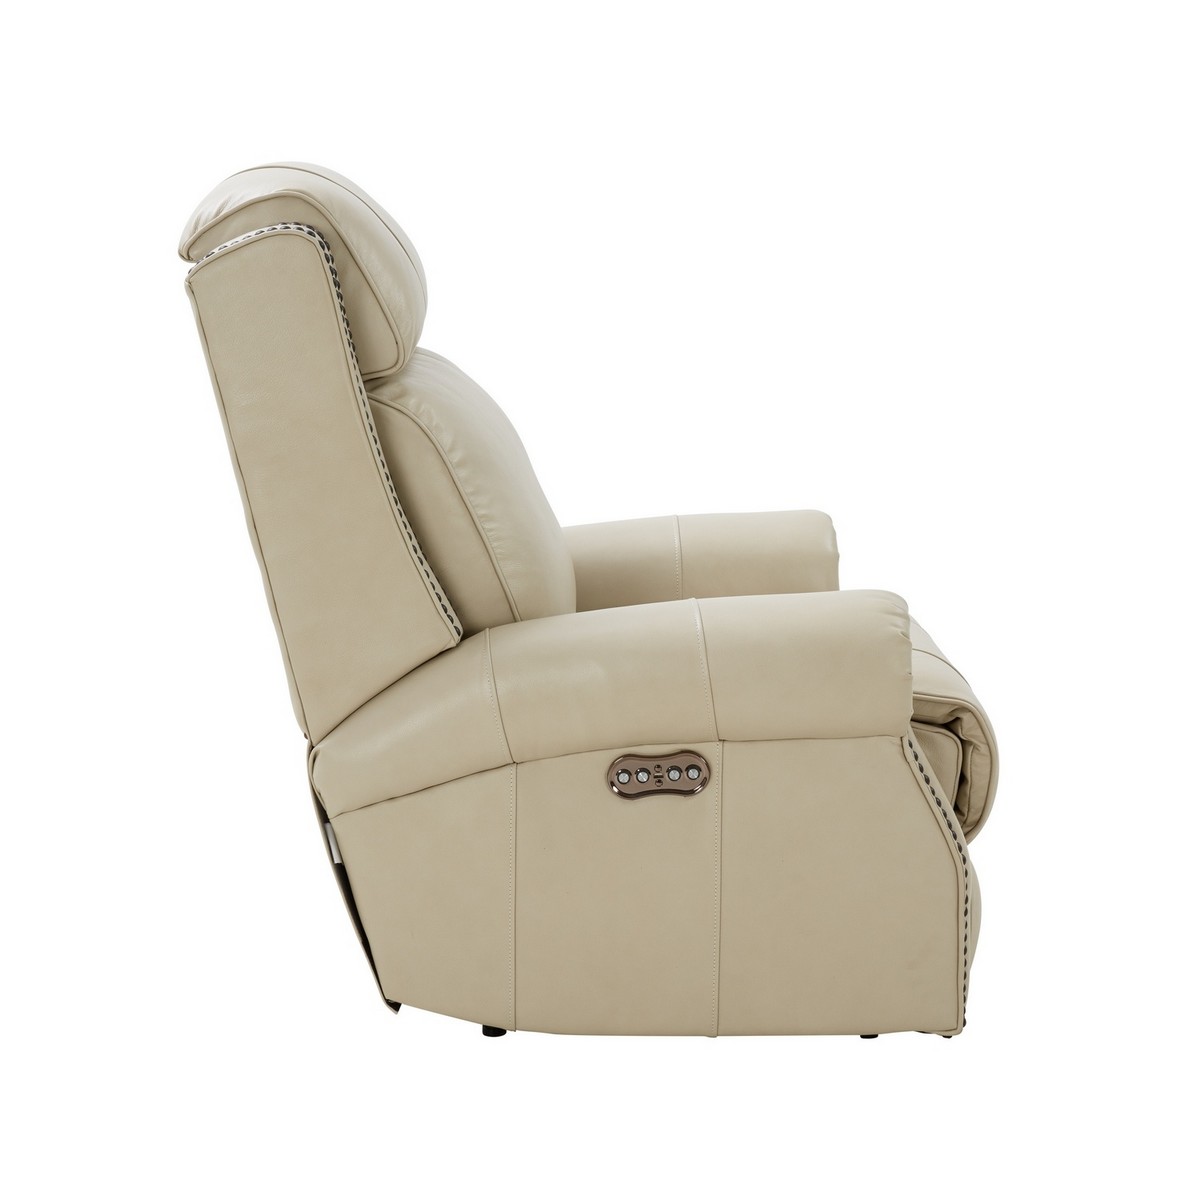 Barcalounger Blair Big and Tall Power Recliner Chair with Power Head Rest - Barone Parchment/All Leather